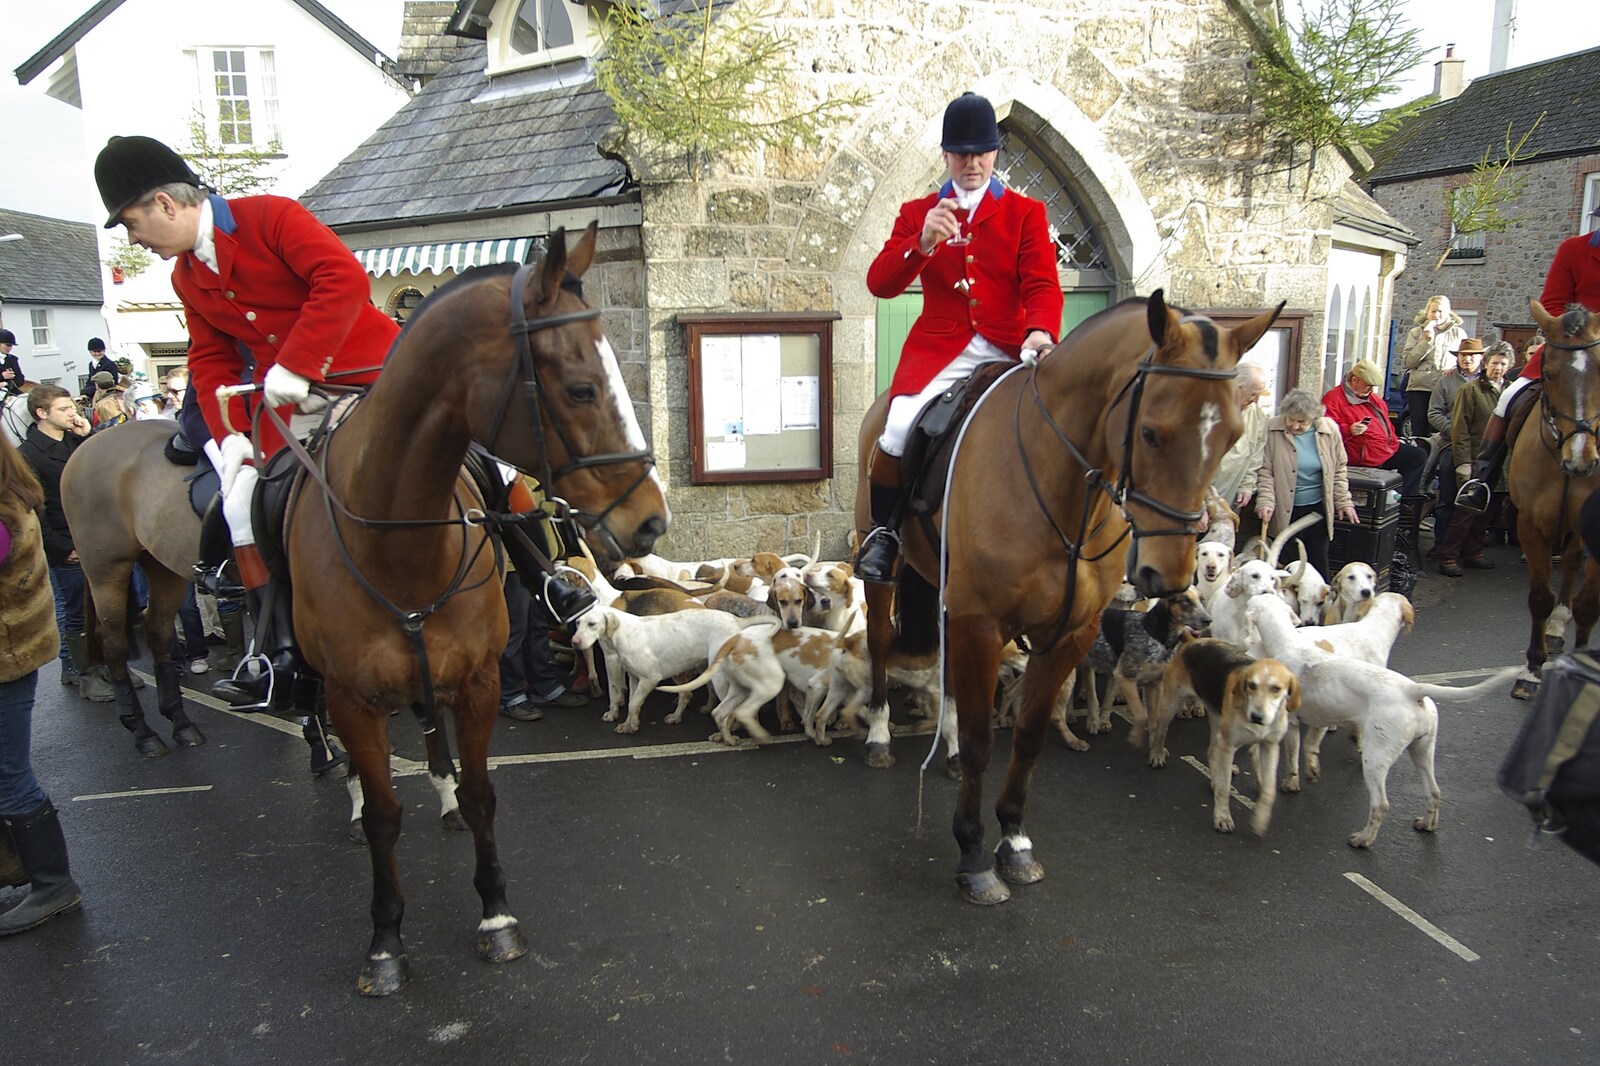 A rider with a glass of mulled wine from A Boxing Day Hunt, Chagford, Devon - 26th December 2007